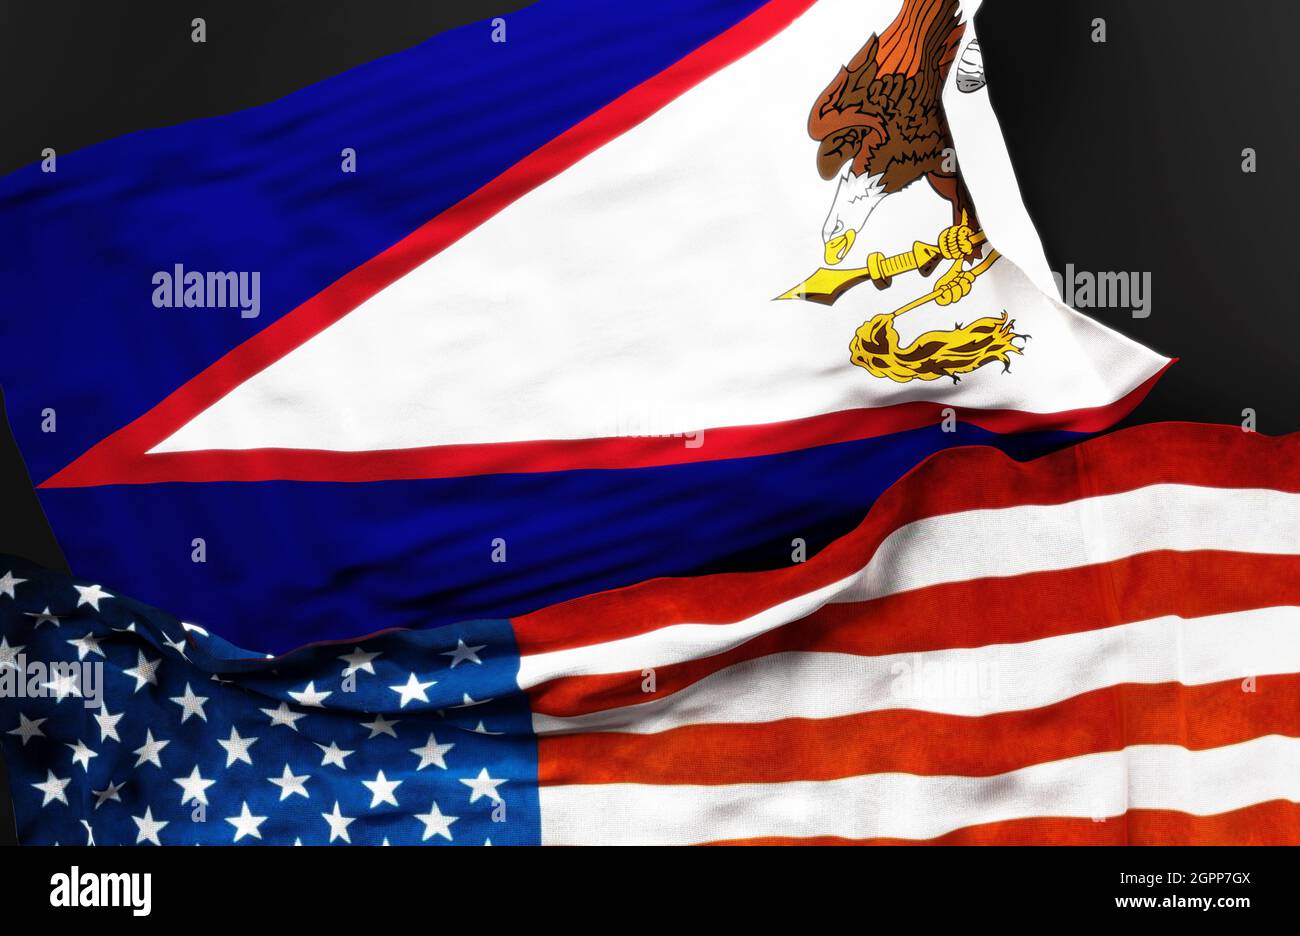 Flag of American Samoa along with a flag of the United States of America as a symbol of unity between them, 3d illustration Stock Photo